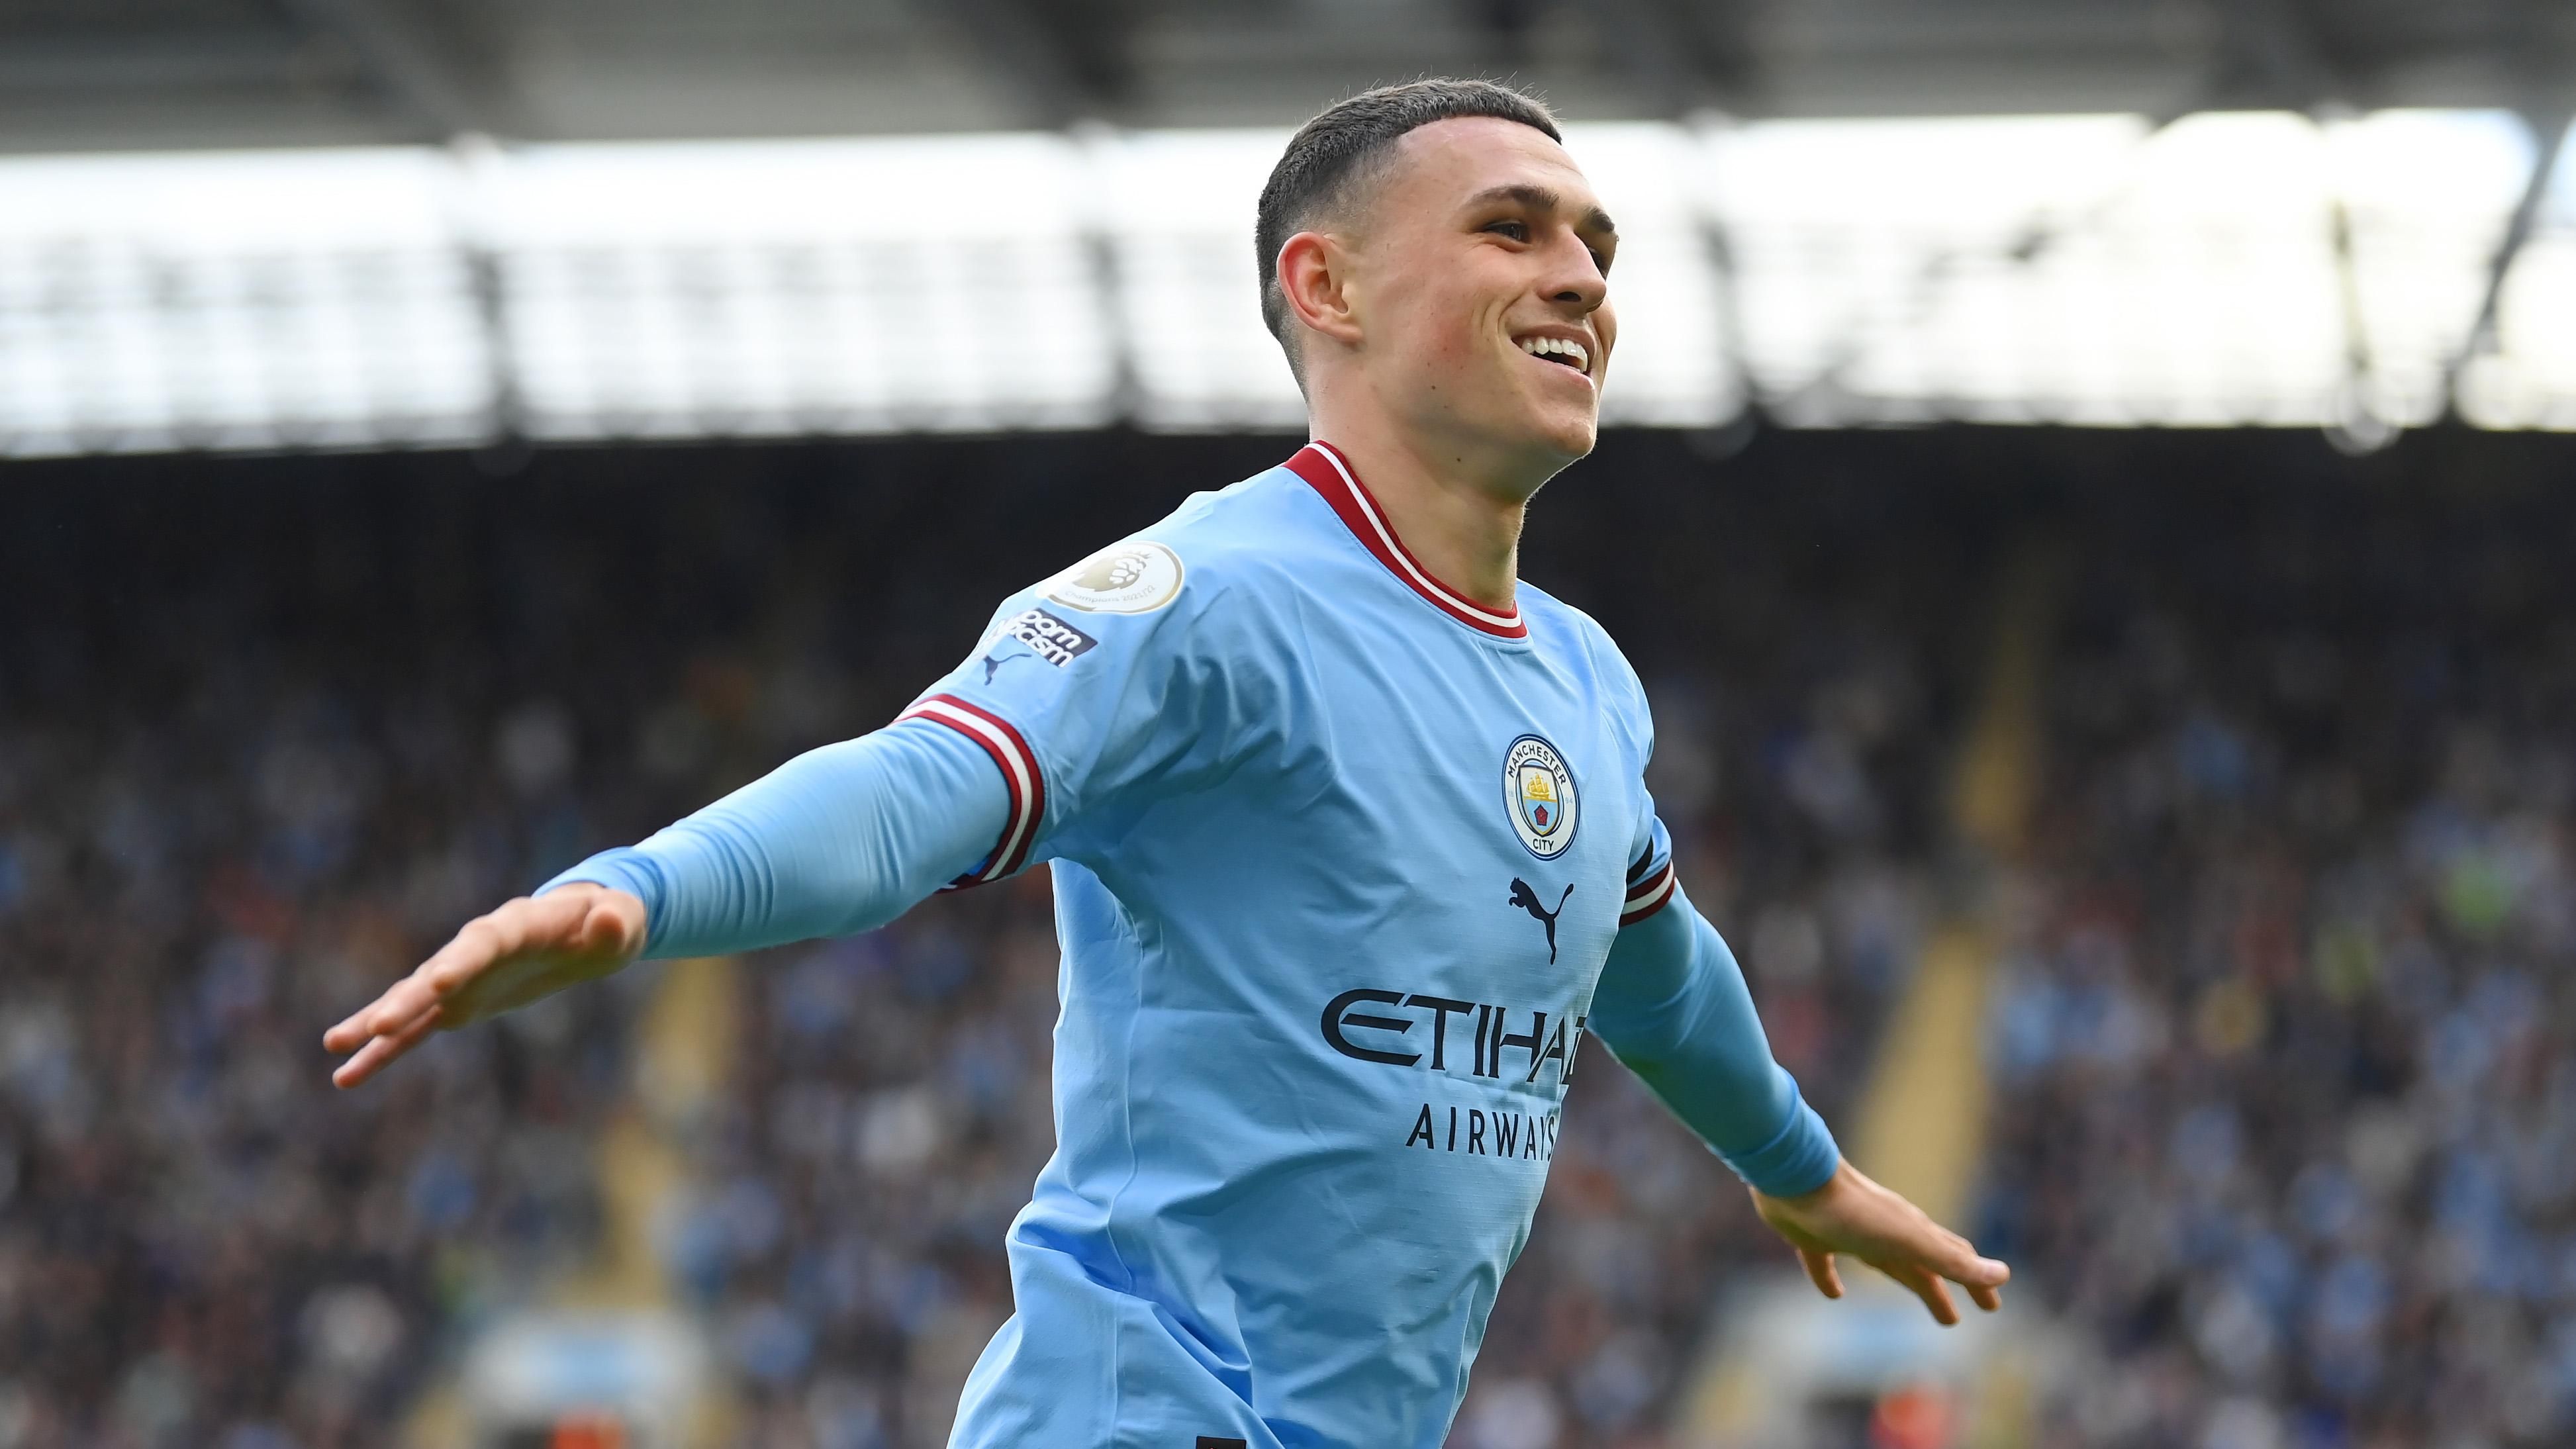 20 Year Old Manchester City Midfielder Phil Foden In Just